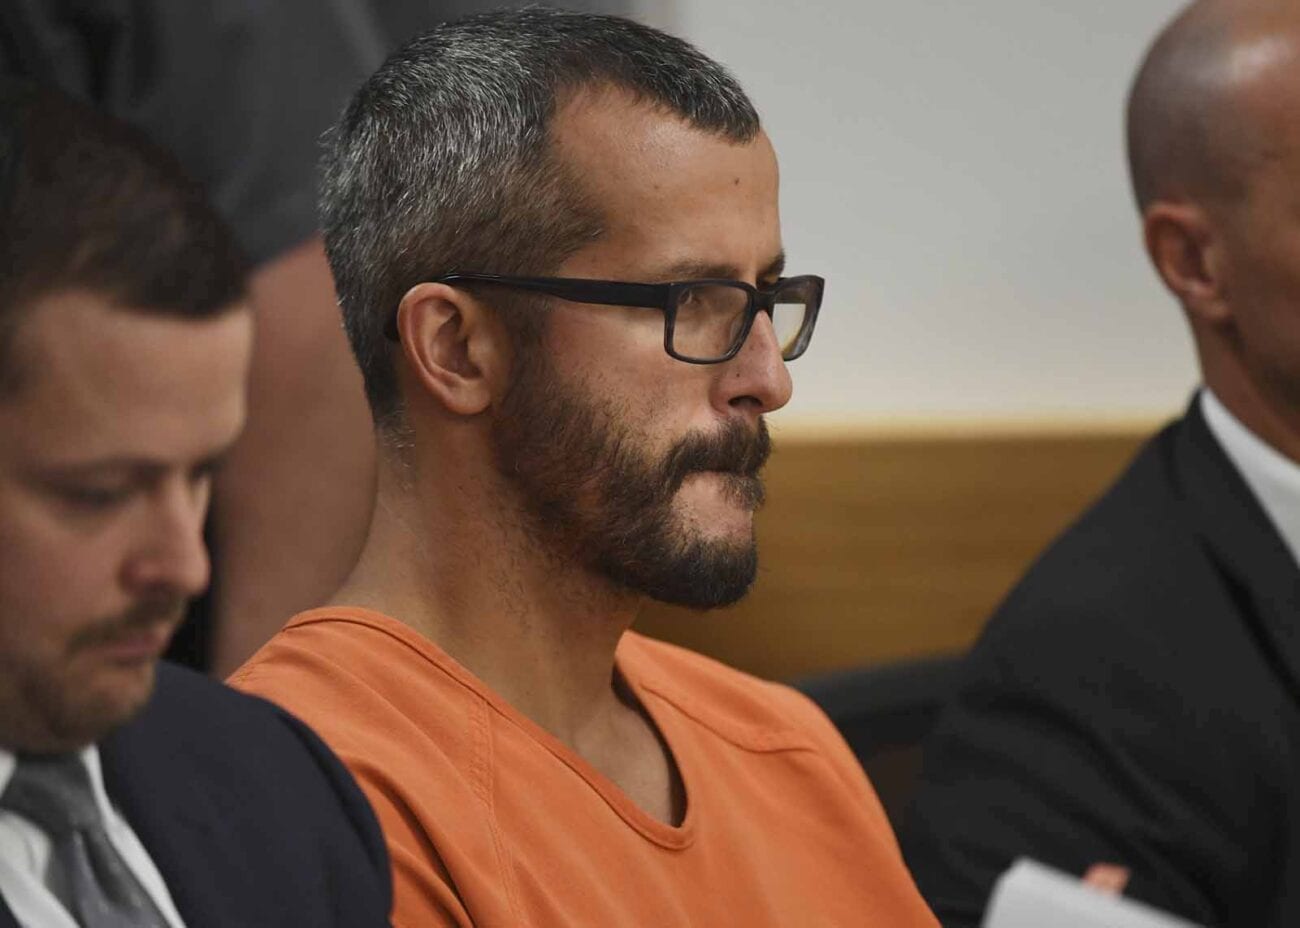 Netflix has shown an odd fascination with horrible people. Here’s everything you need to know about upcoming Netflix documentary focusing on Chris Watts.